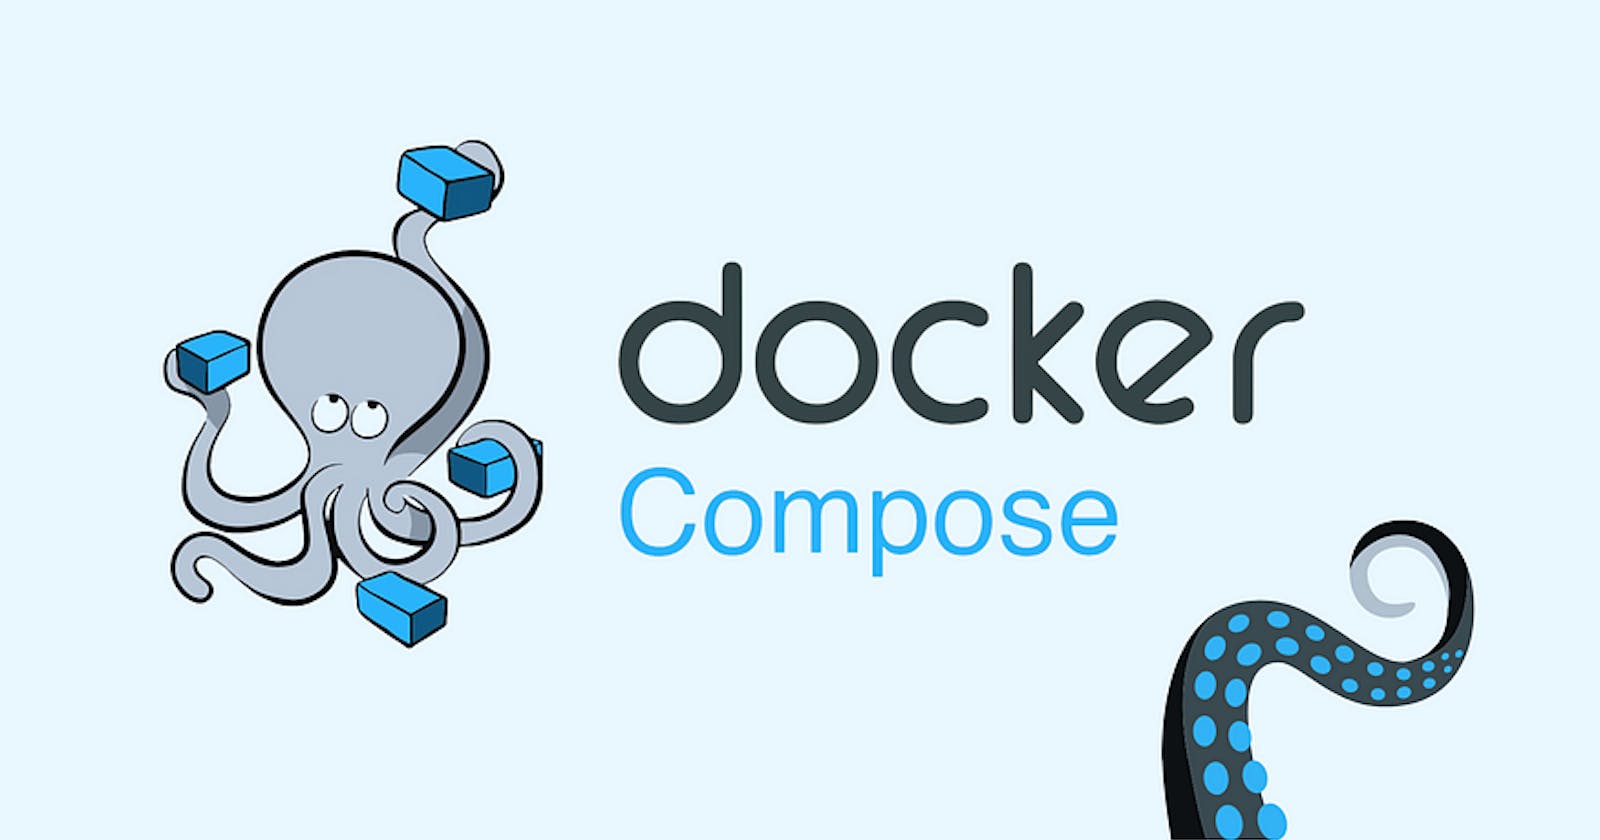 Building a Simple 3-Tier Architecture with Docker Compose: A Hands-On Project Journey